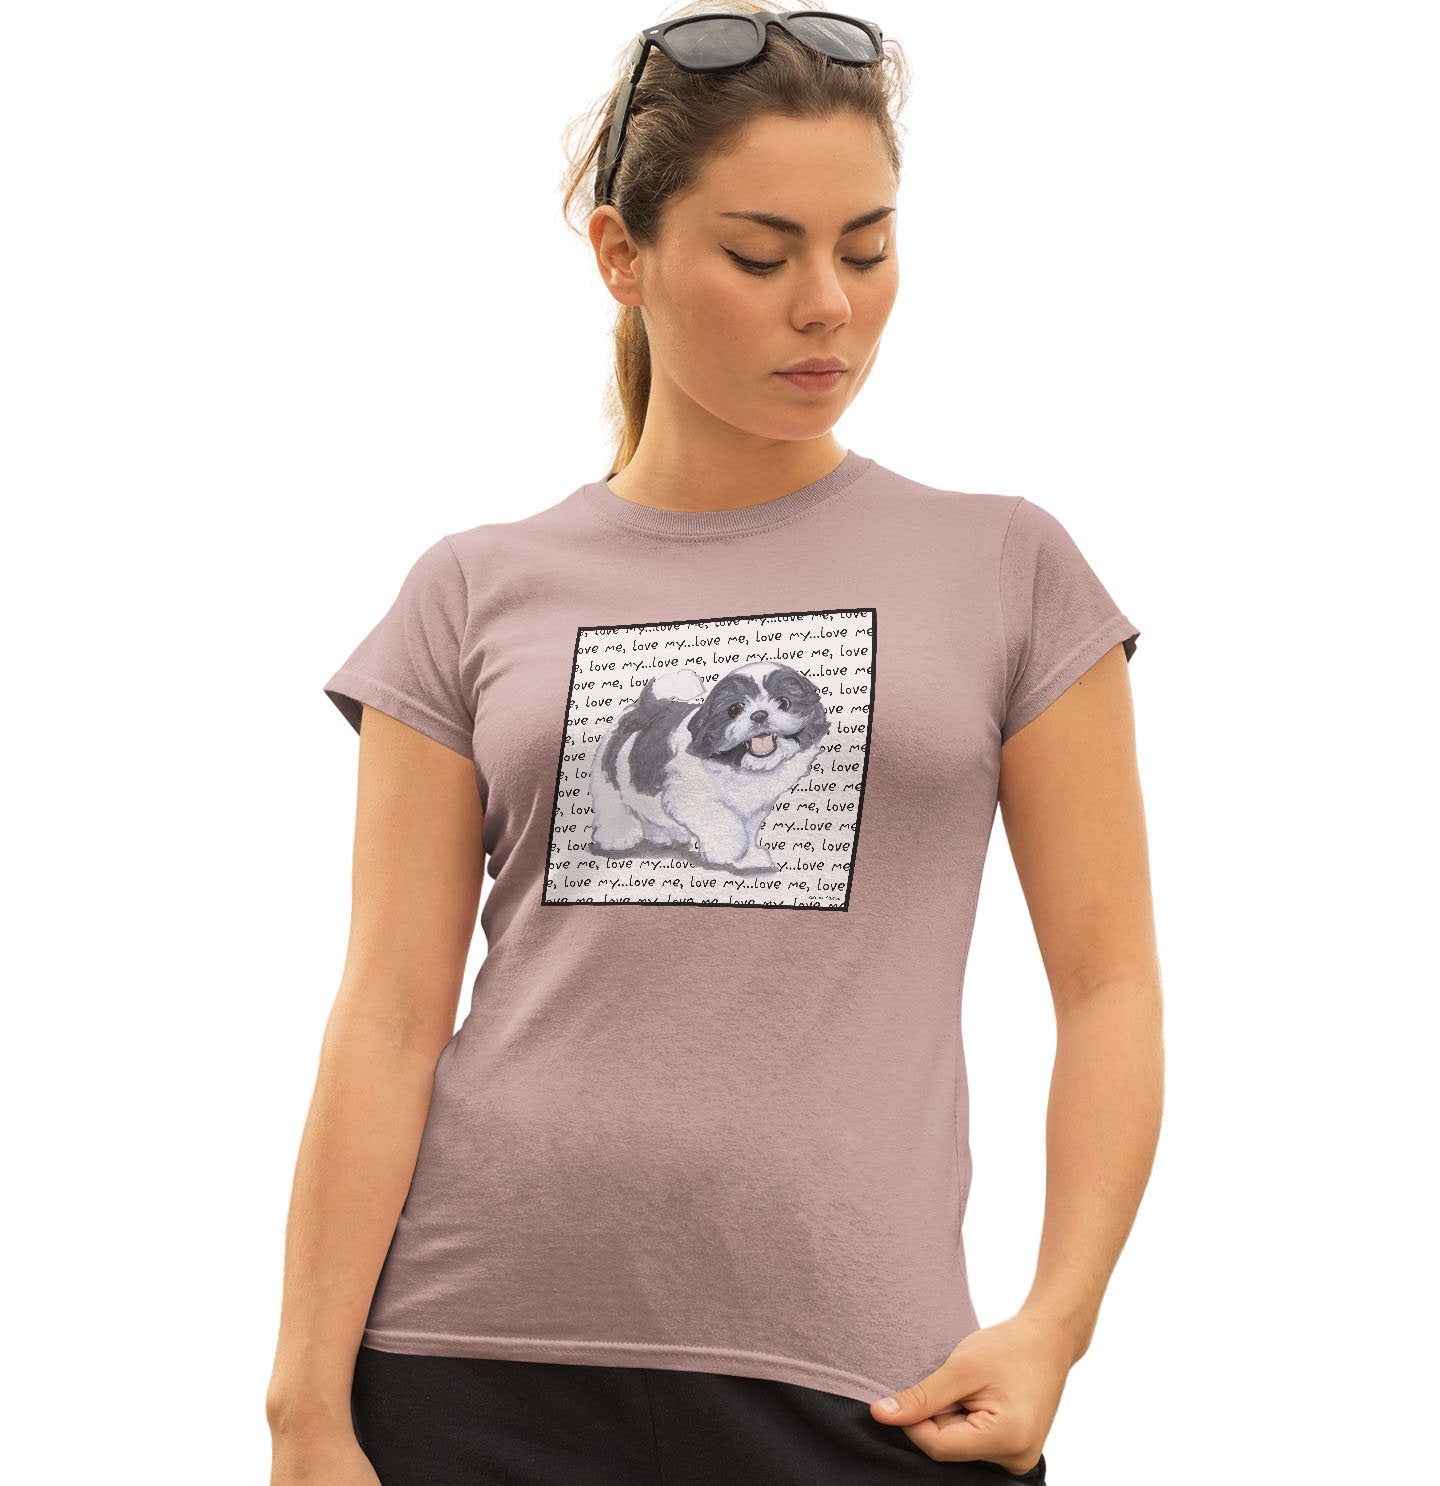 Animal Pride - Shih Tzu Love Text - Women's Fitted T-Shirt